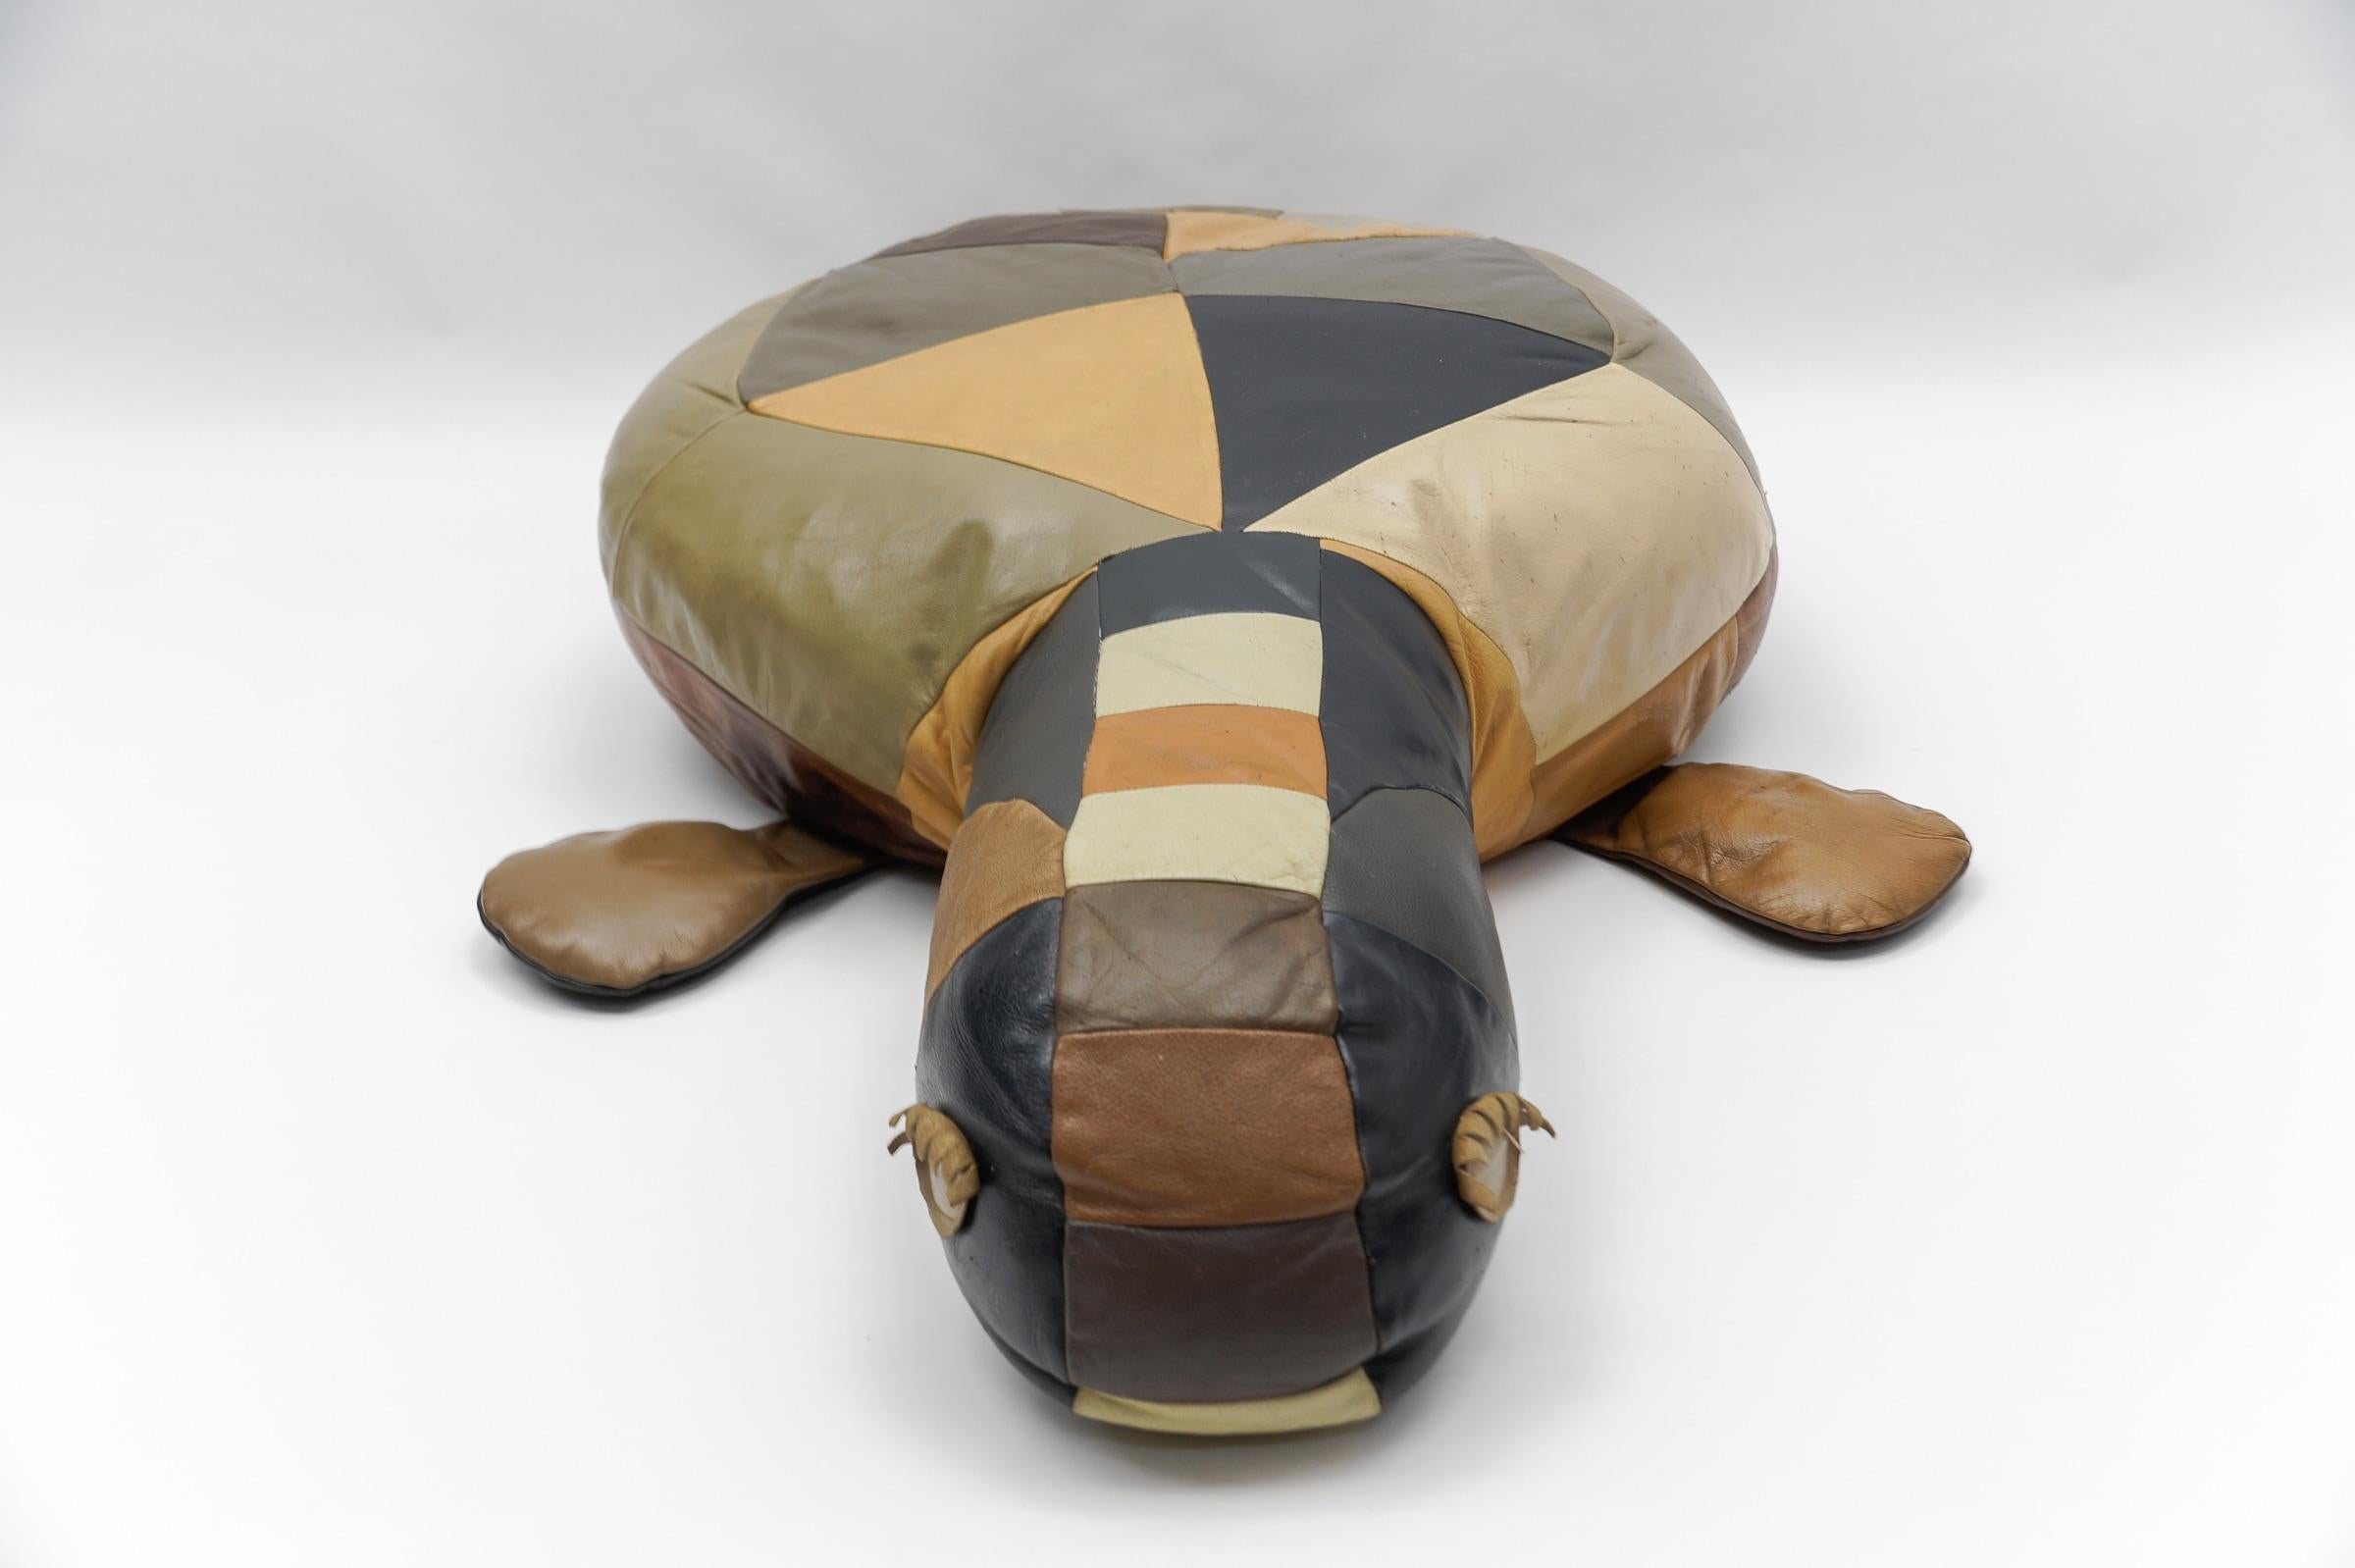 Set of 3 Leather Patchwork Turtle Poufs - Mid-Century Modern, Switzerland, 1960s For Sale 4